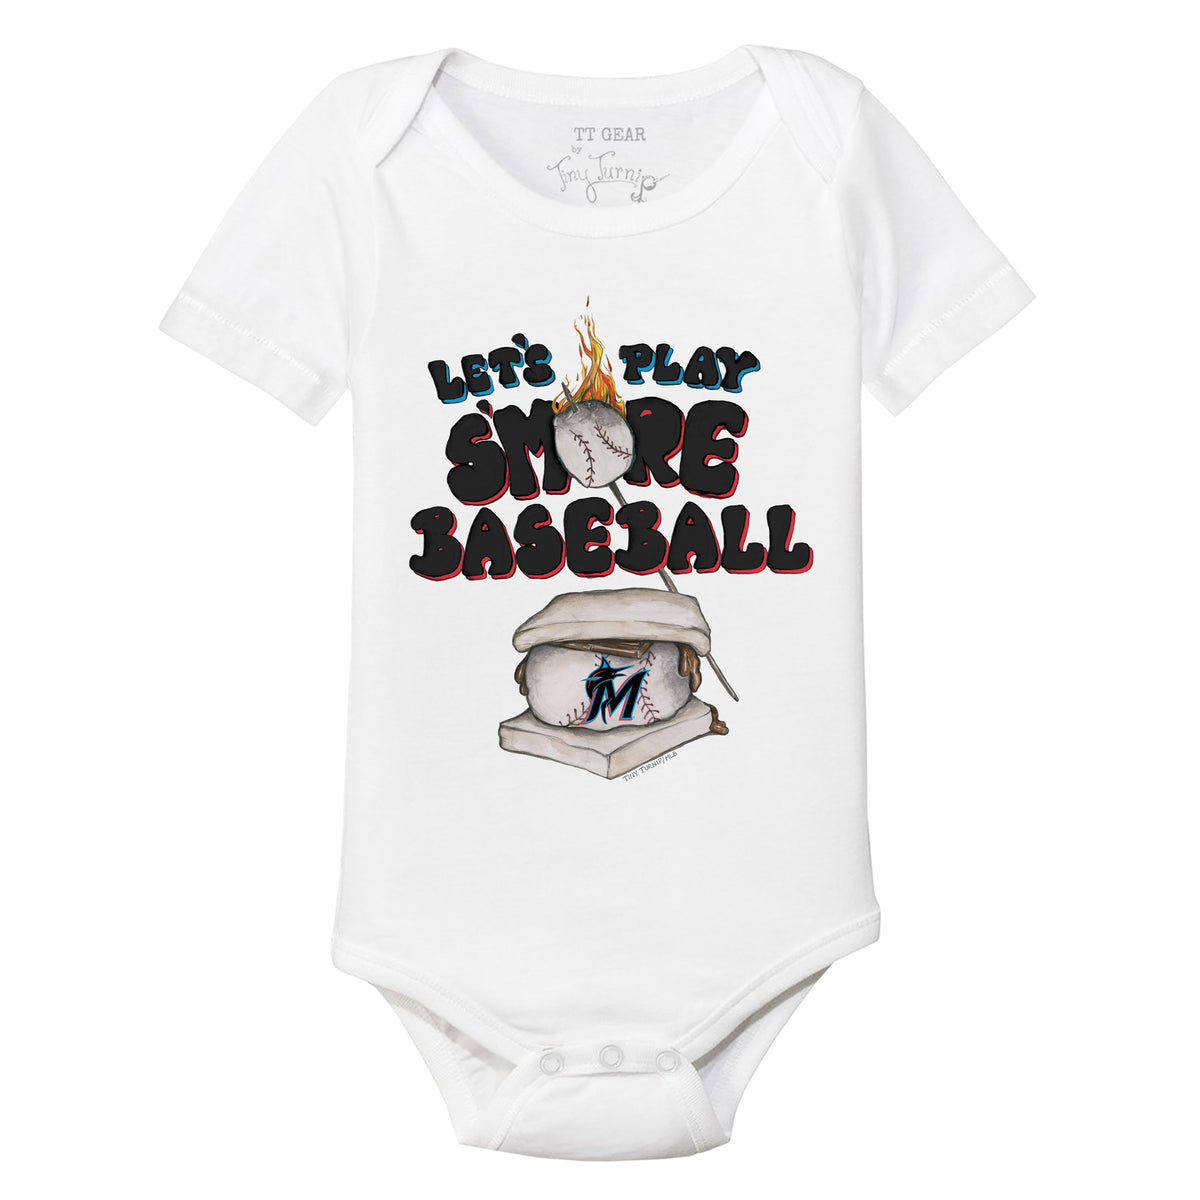 Miami Marlins S'mores Short Sleeve Snapper